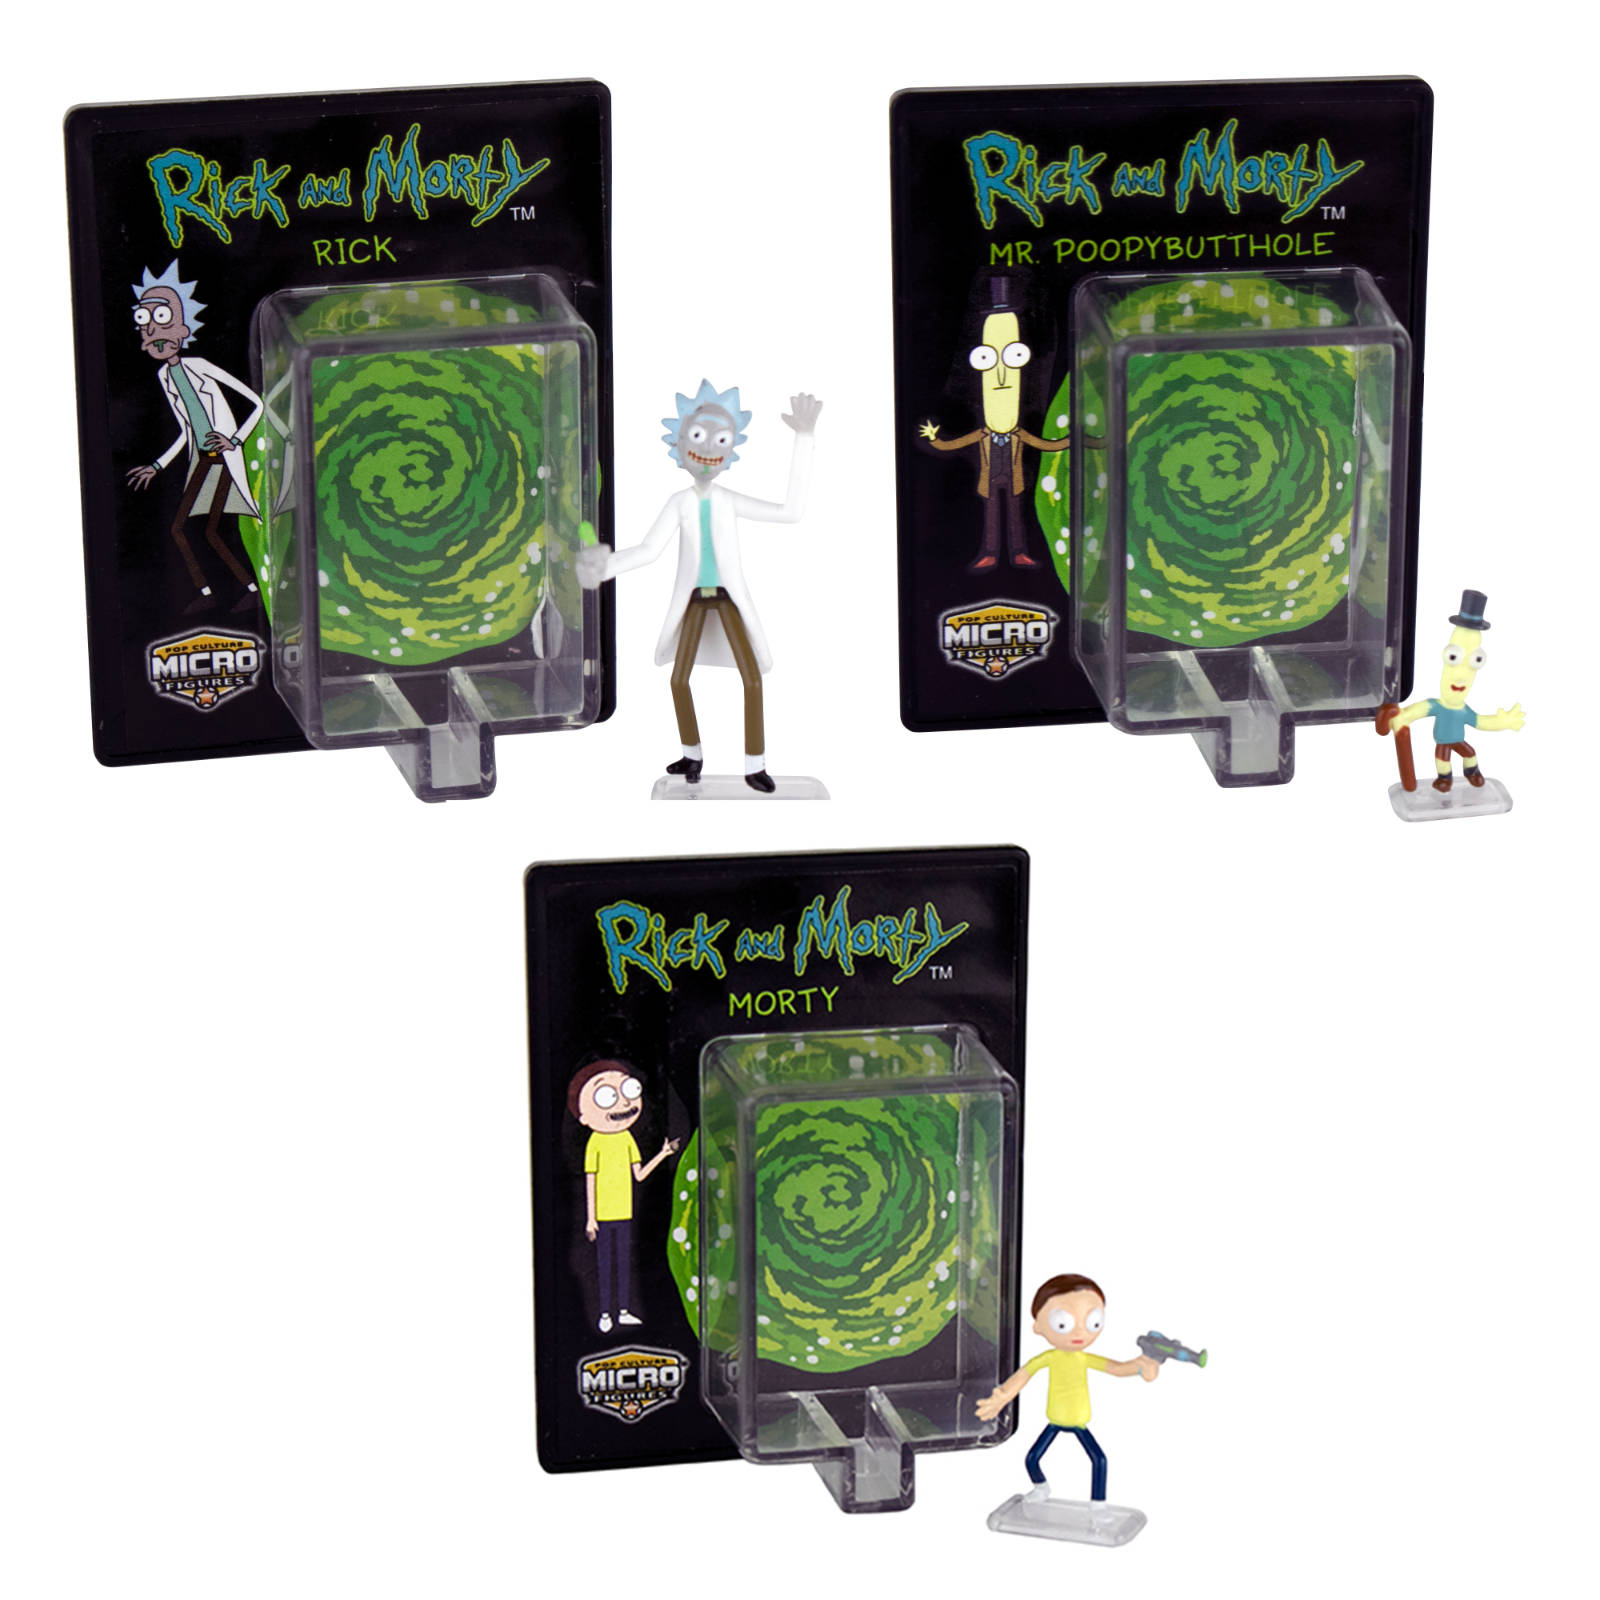 World's Smallest Rick and Morty - Morty Micro Action Figure